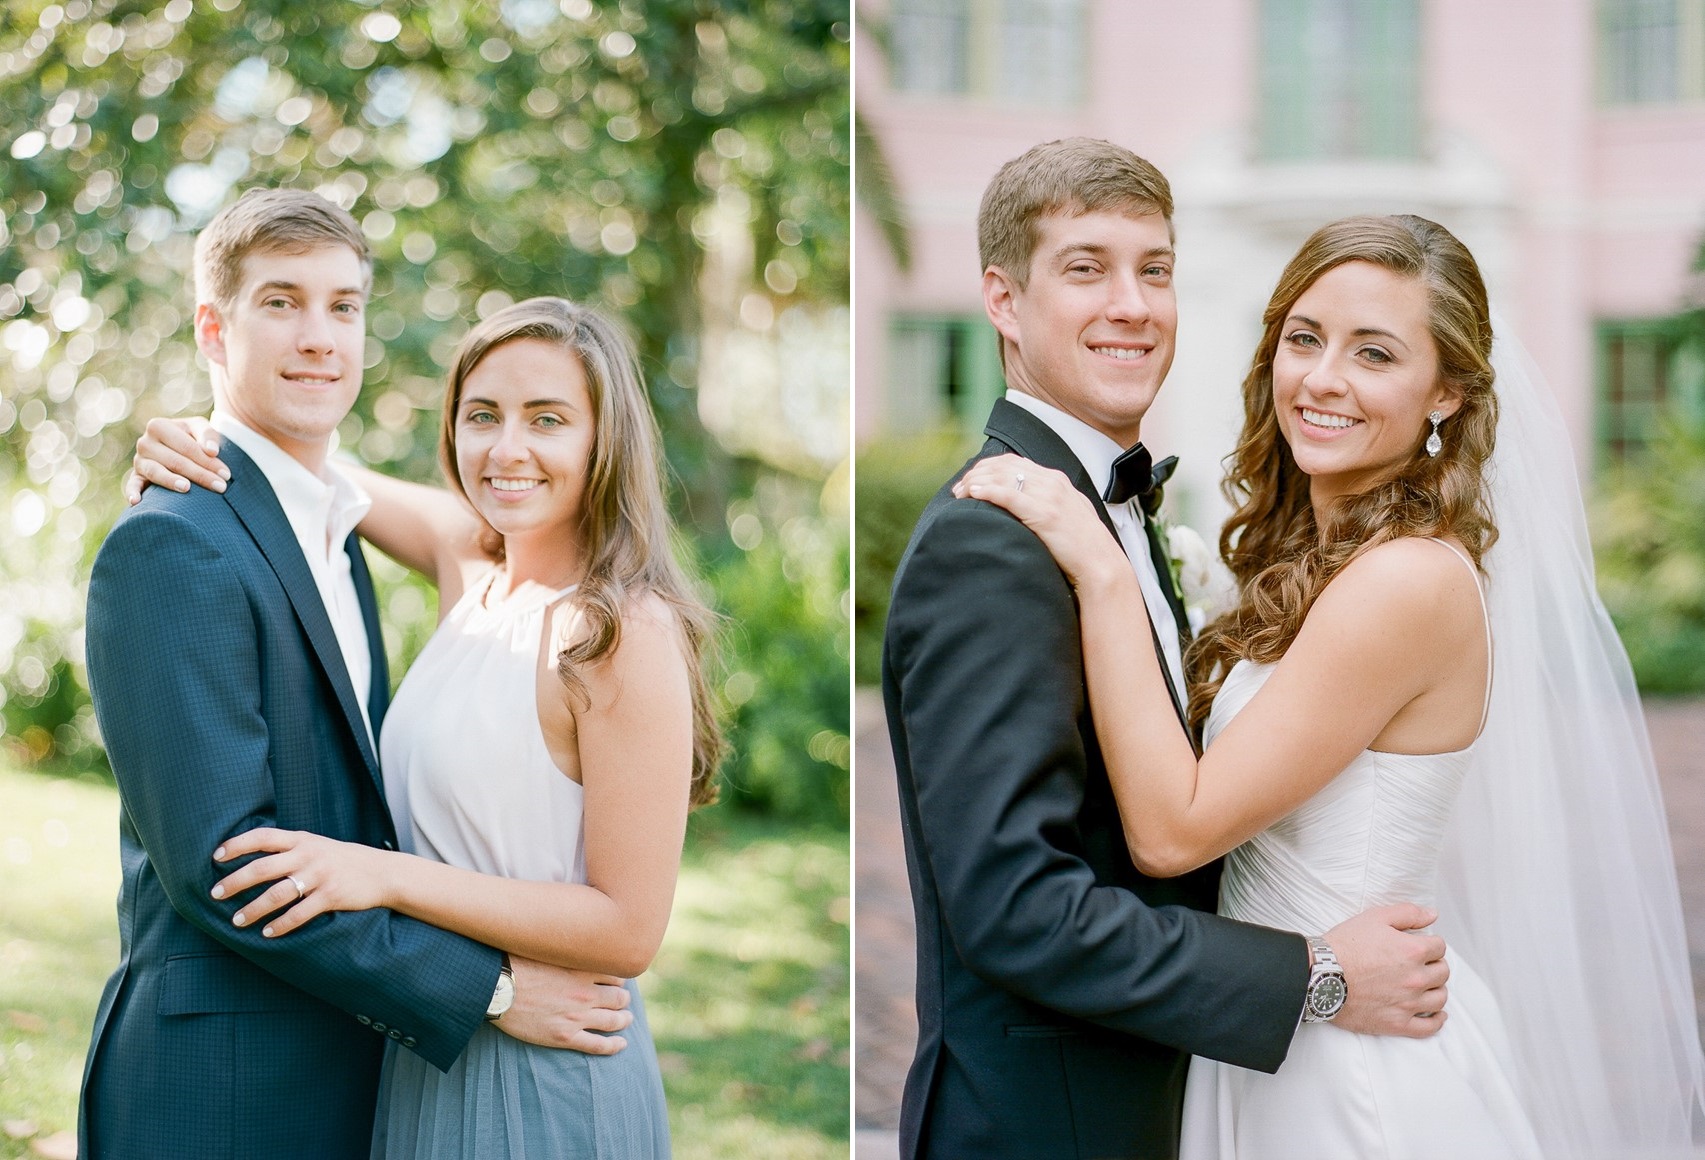 Why You Should Use your Wedding Photographer for Your Engagement Photos